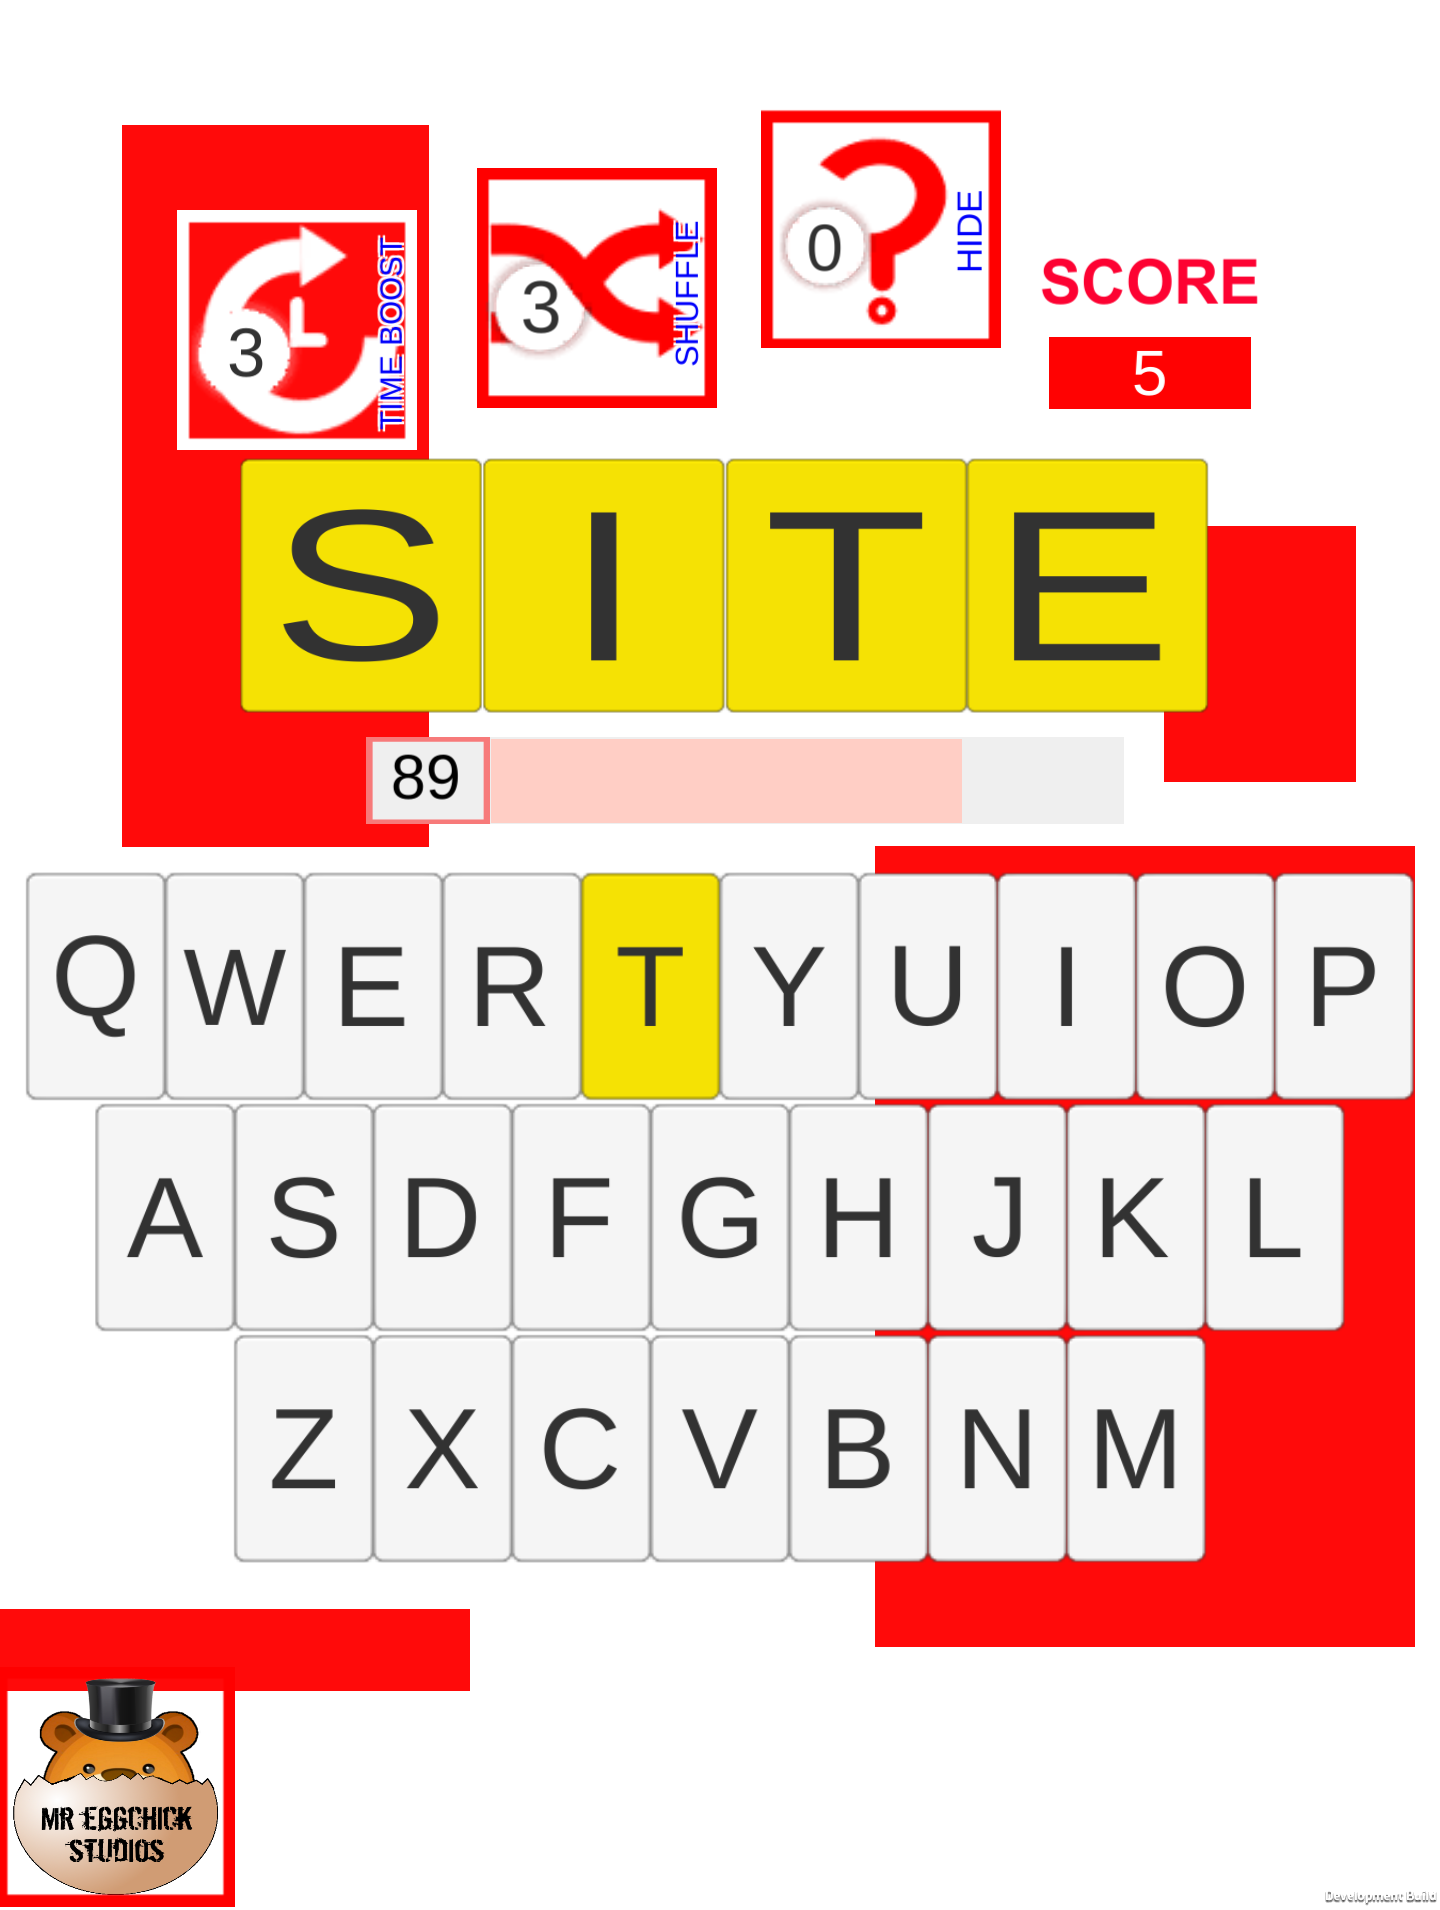 Change the letter from Z to T to make the word SITE